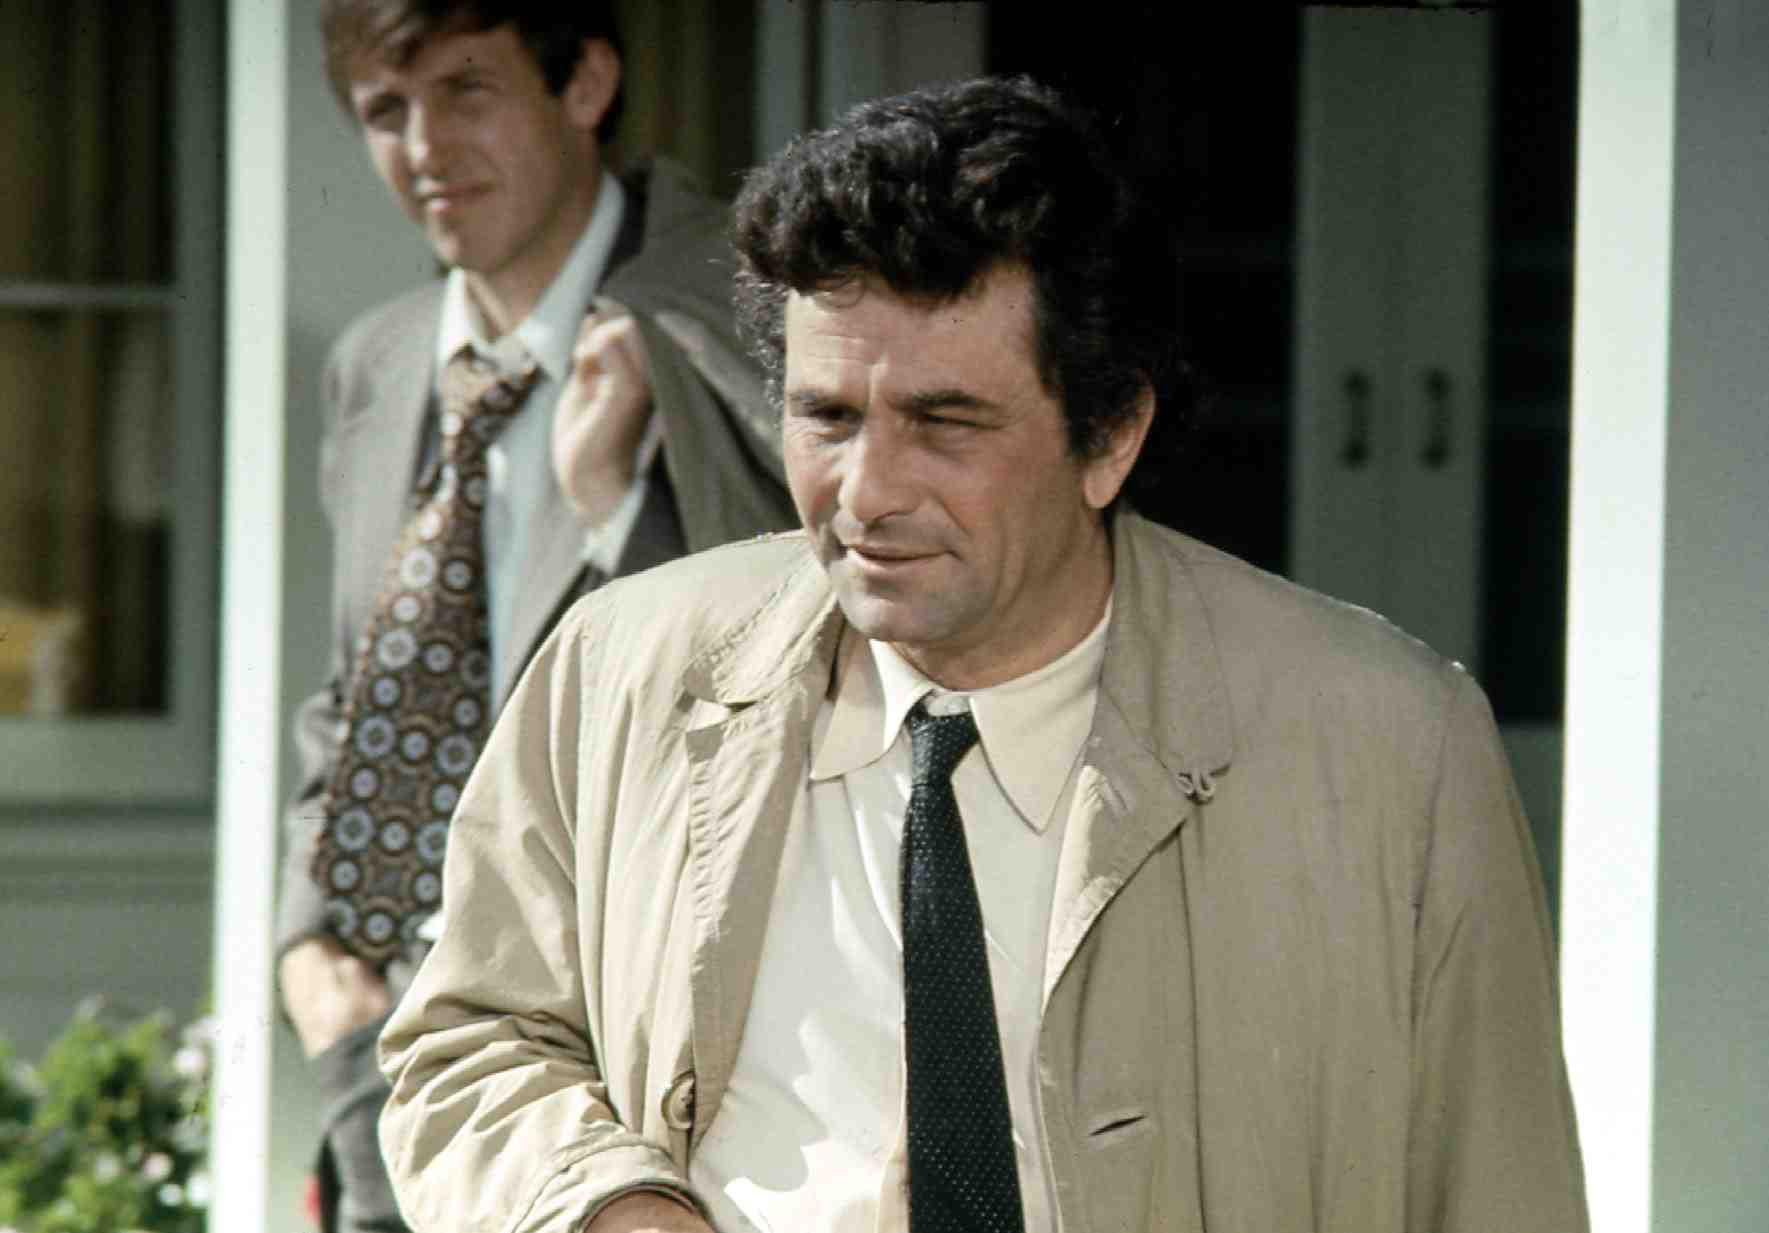 Columbo in front of a man